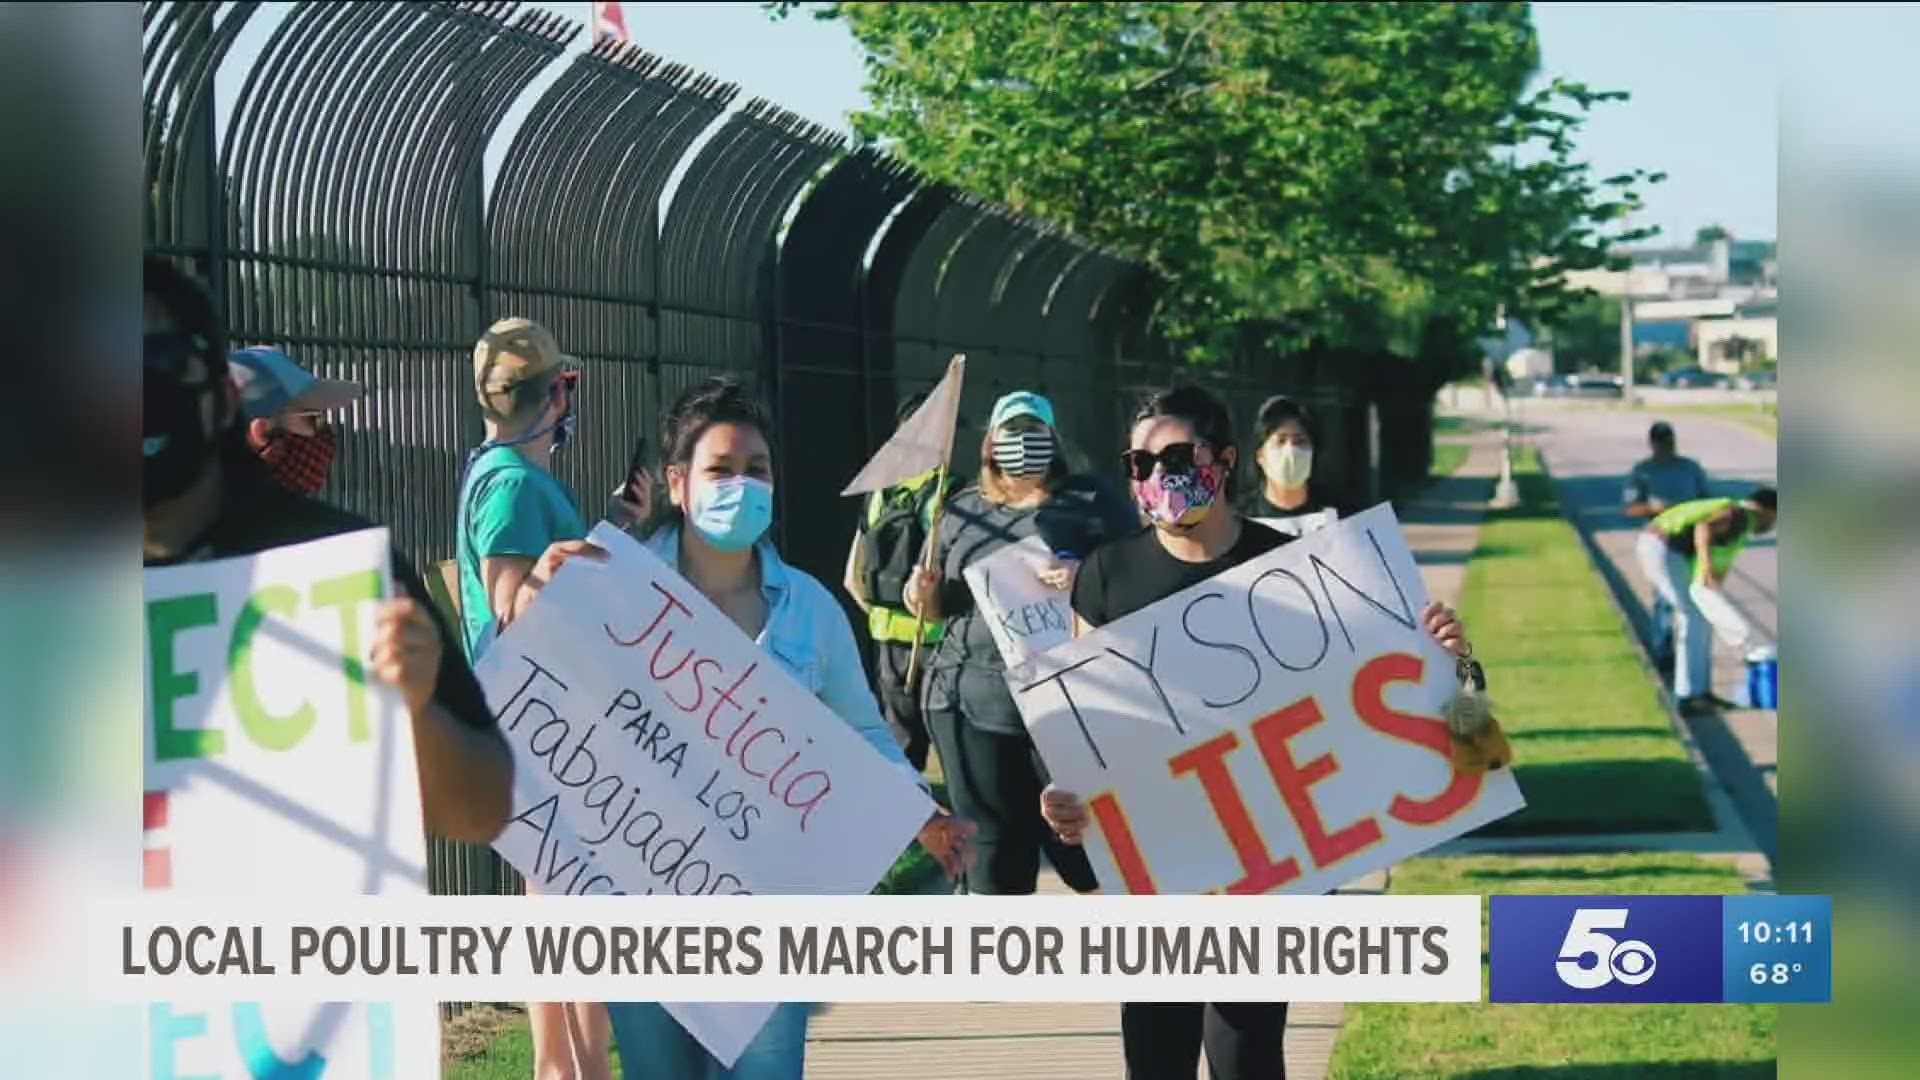 Local poultry workers march for human rights.